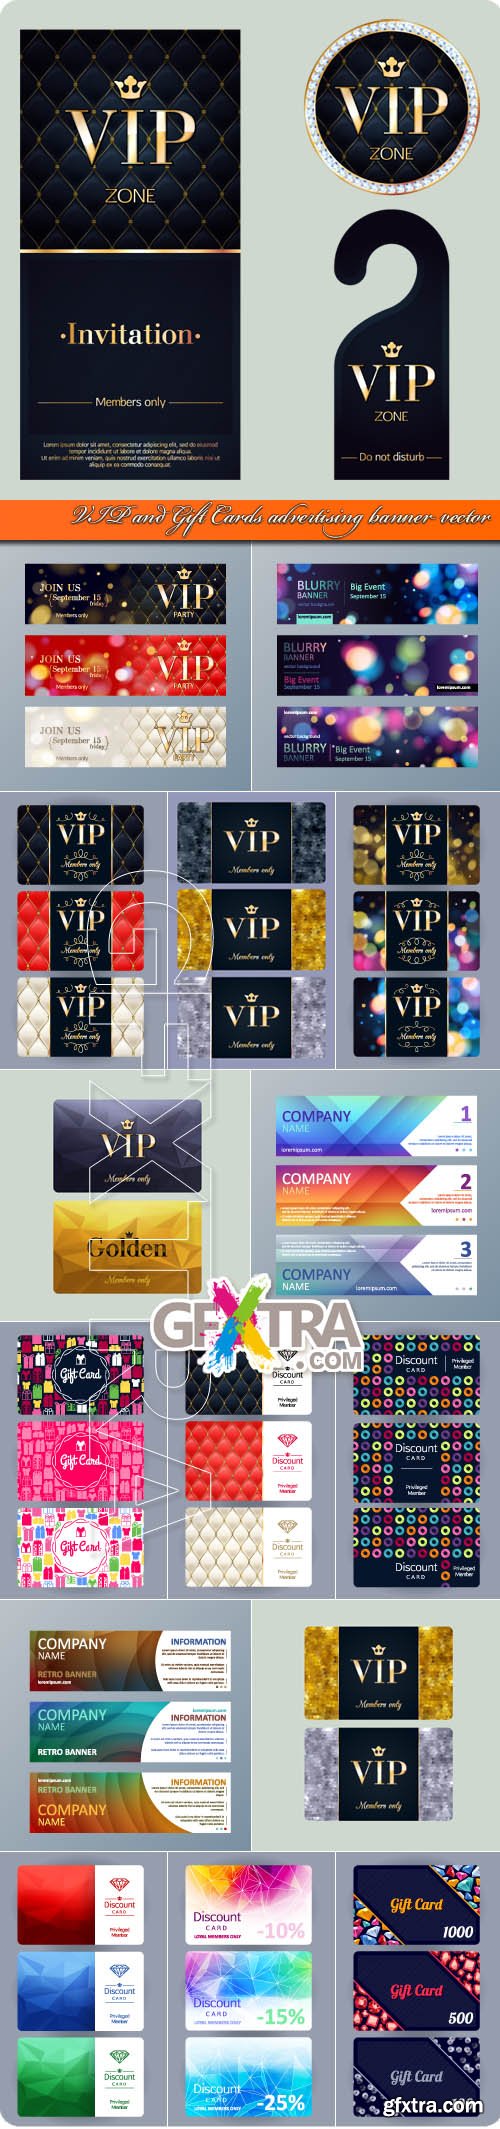 VIP and Gift Cards advertising banner vector